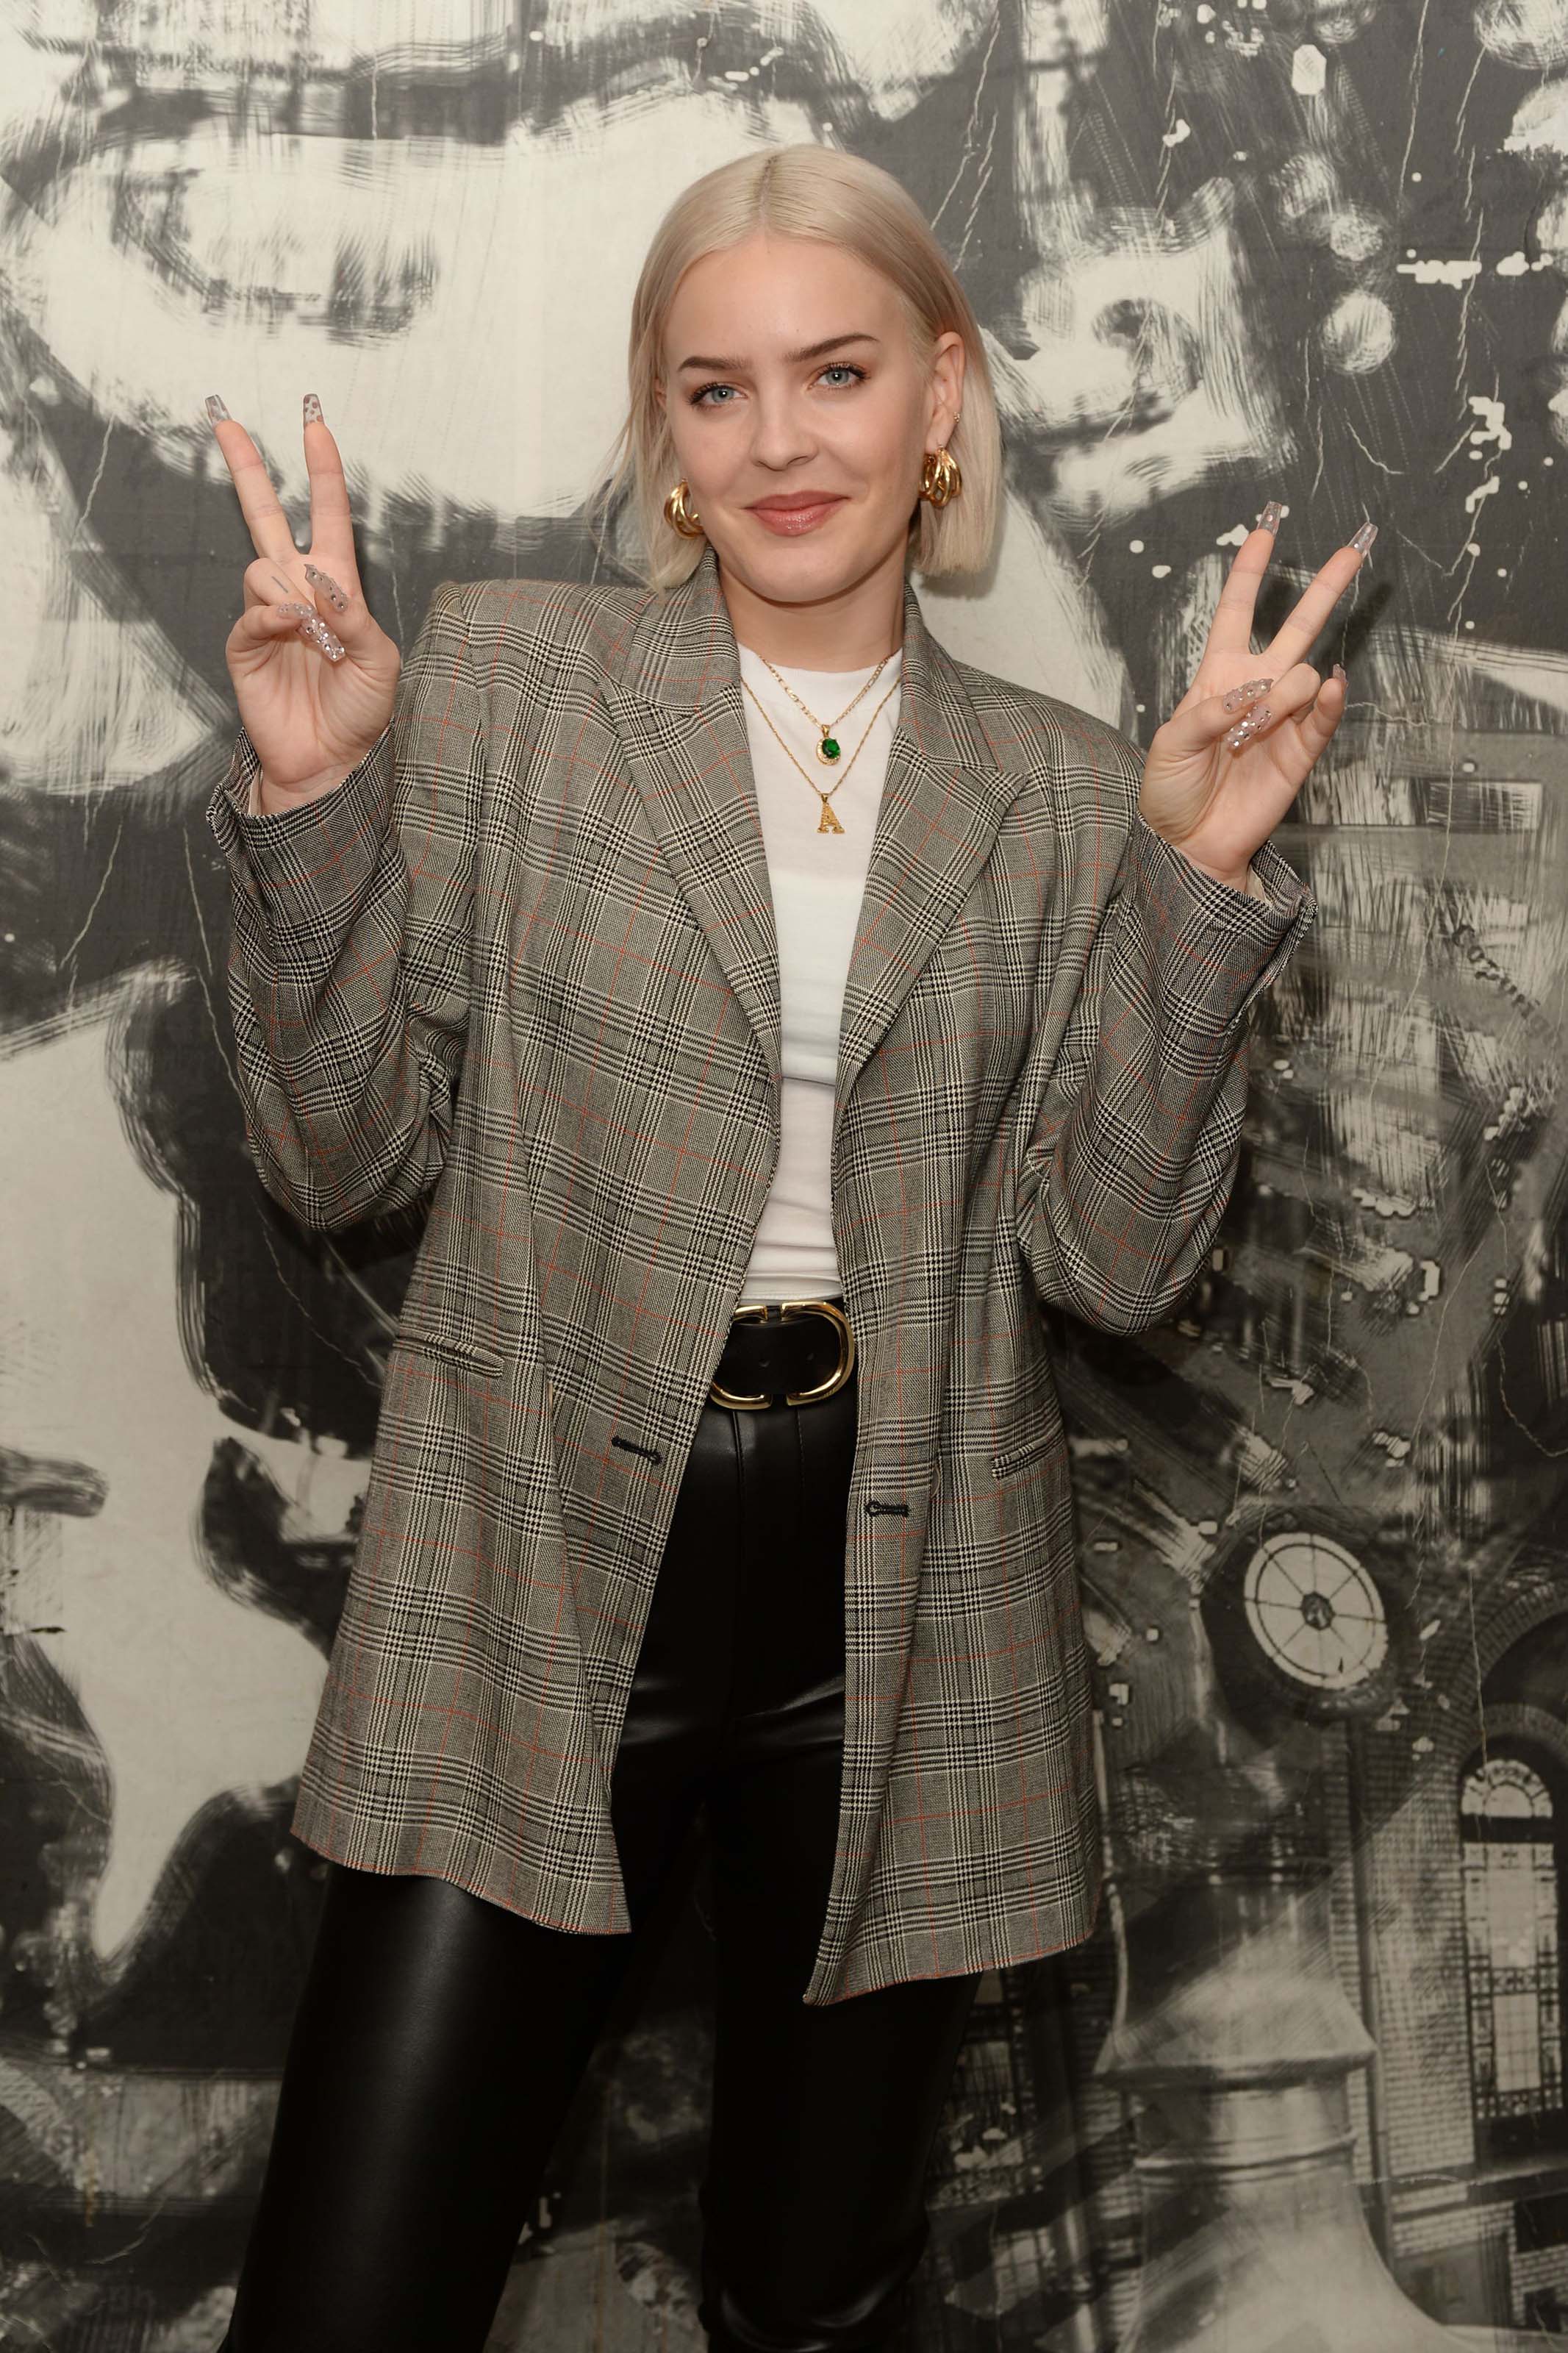 Anne-Marie Rose Nicholson at Hits 97.3 Sessions